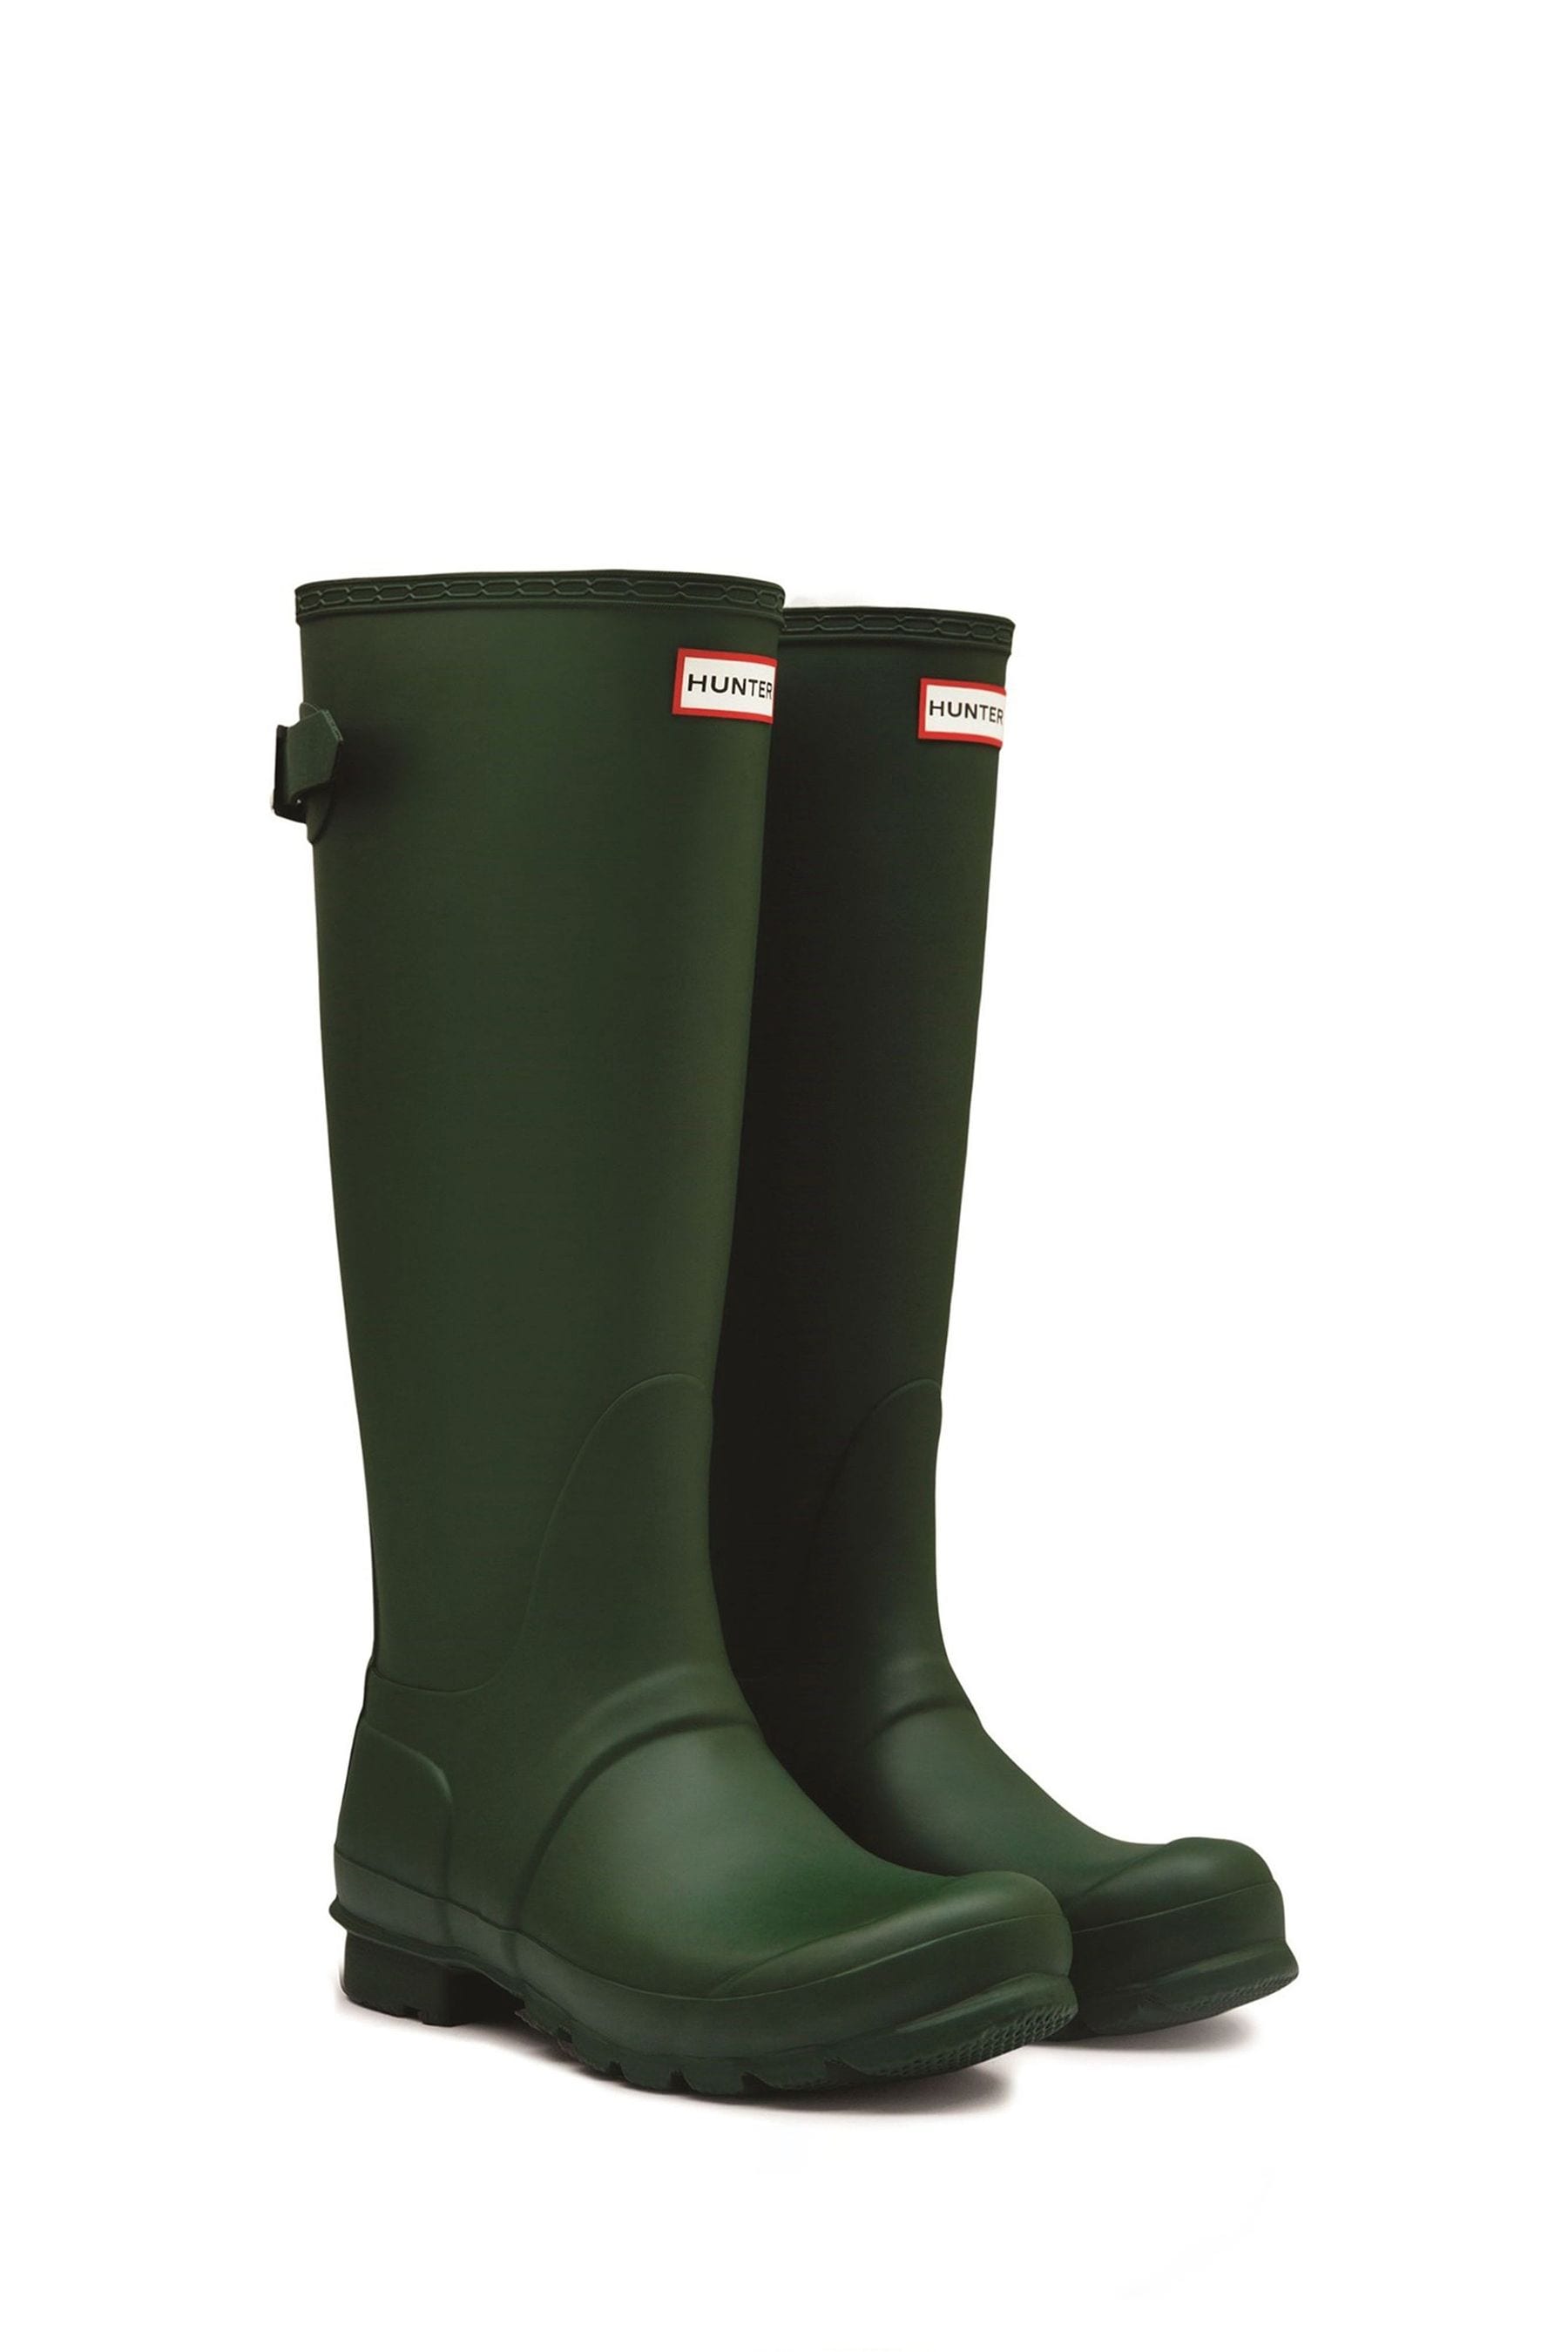 Buy Hunter Original Tall Back Adjustable Wellies from the Next UK ...